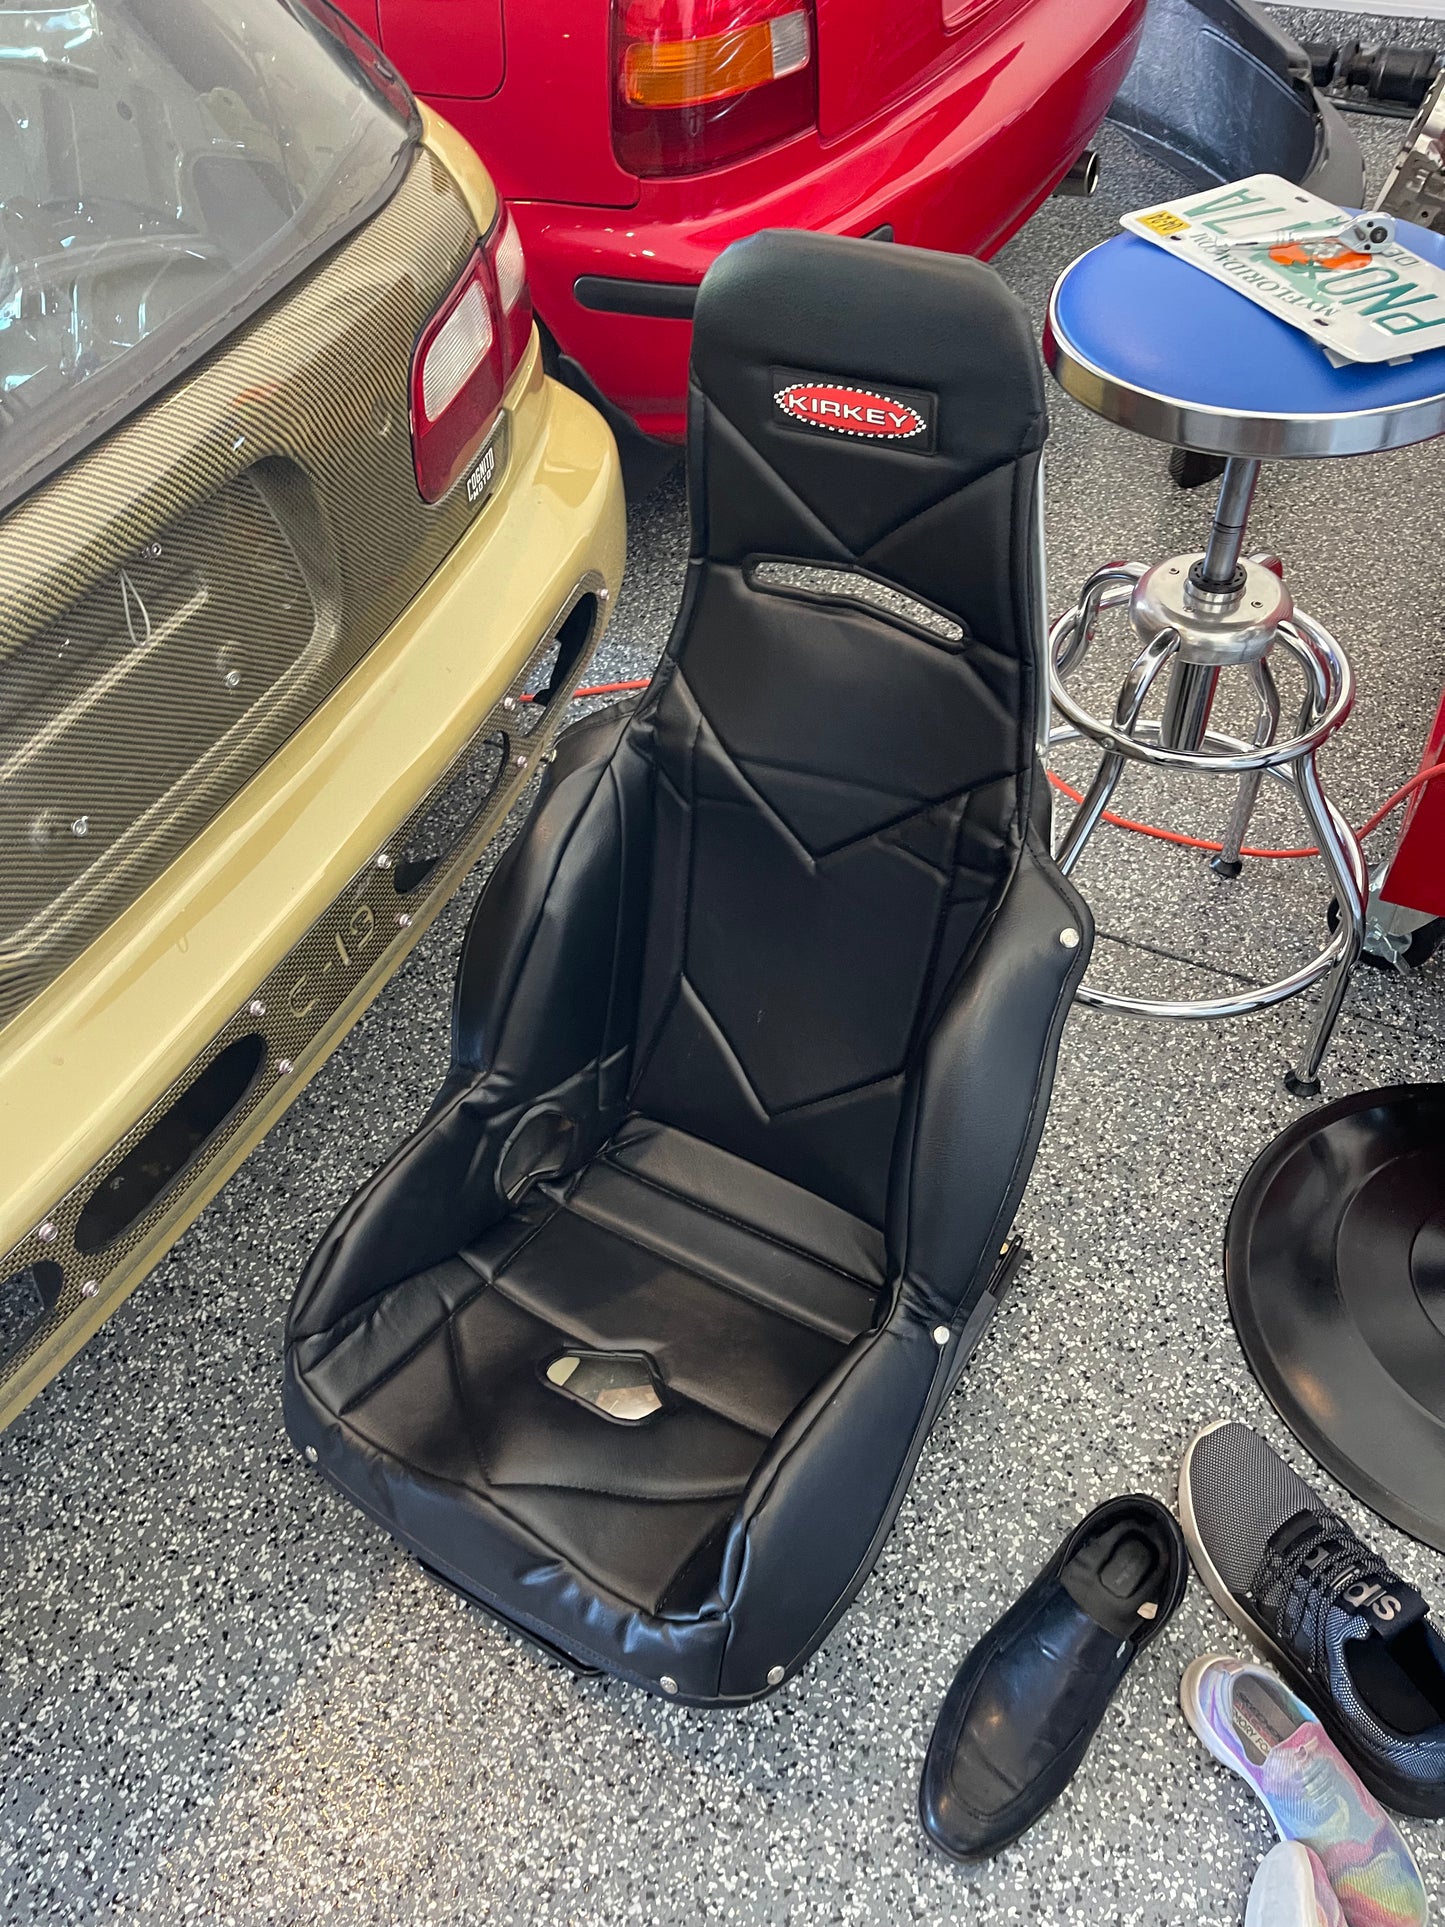 17.5 kirky seat with pci rails